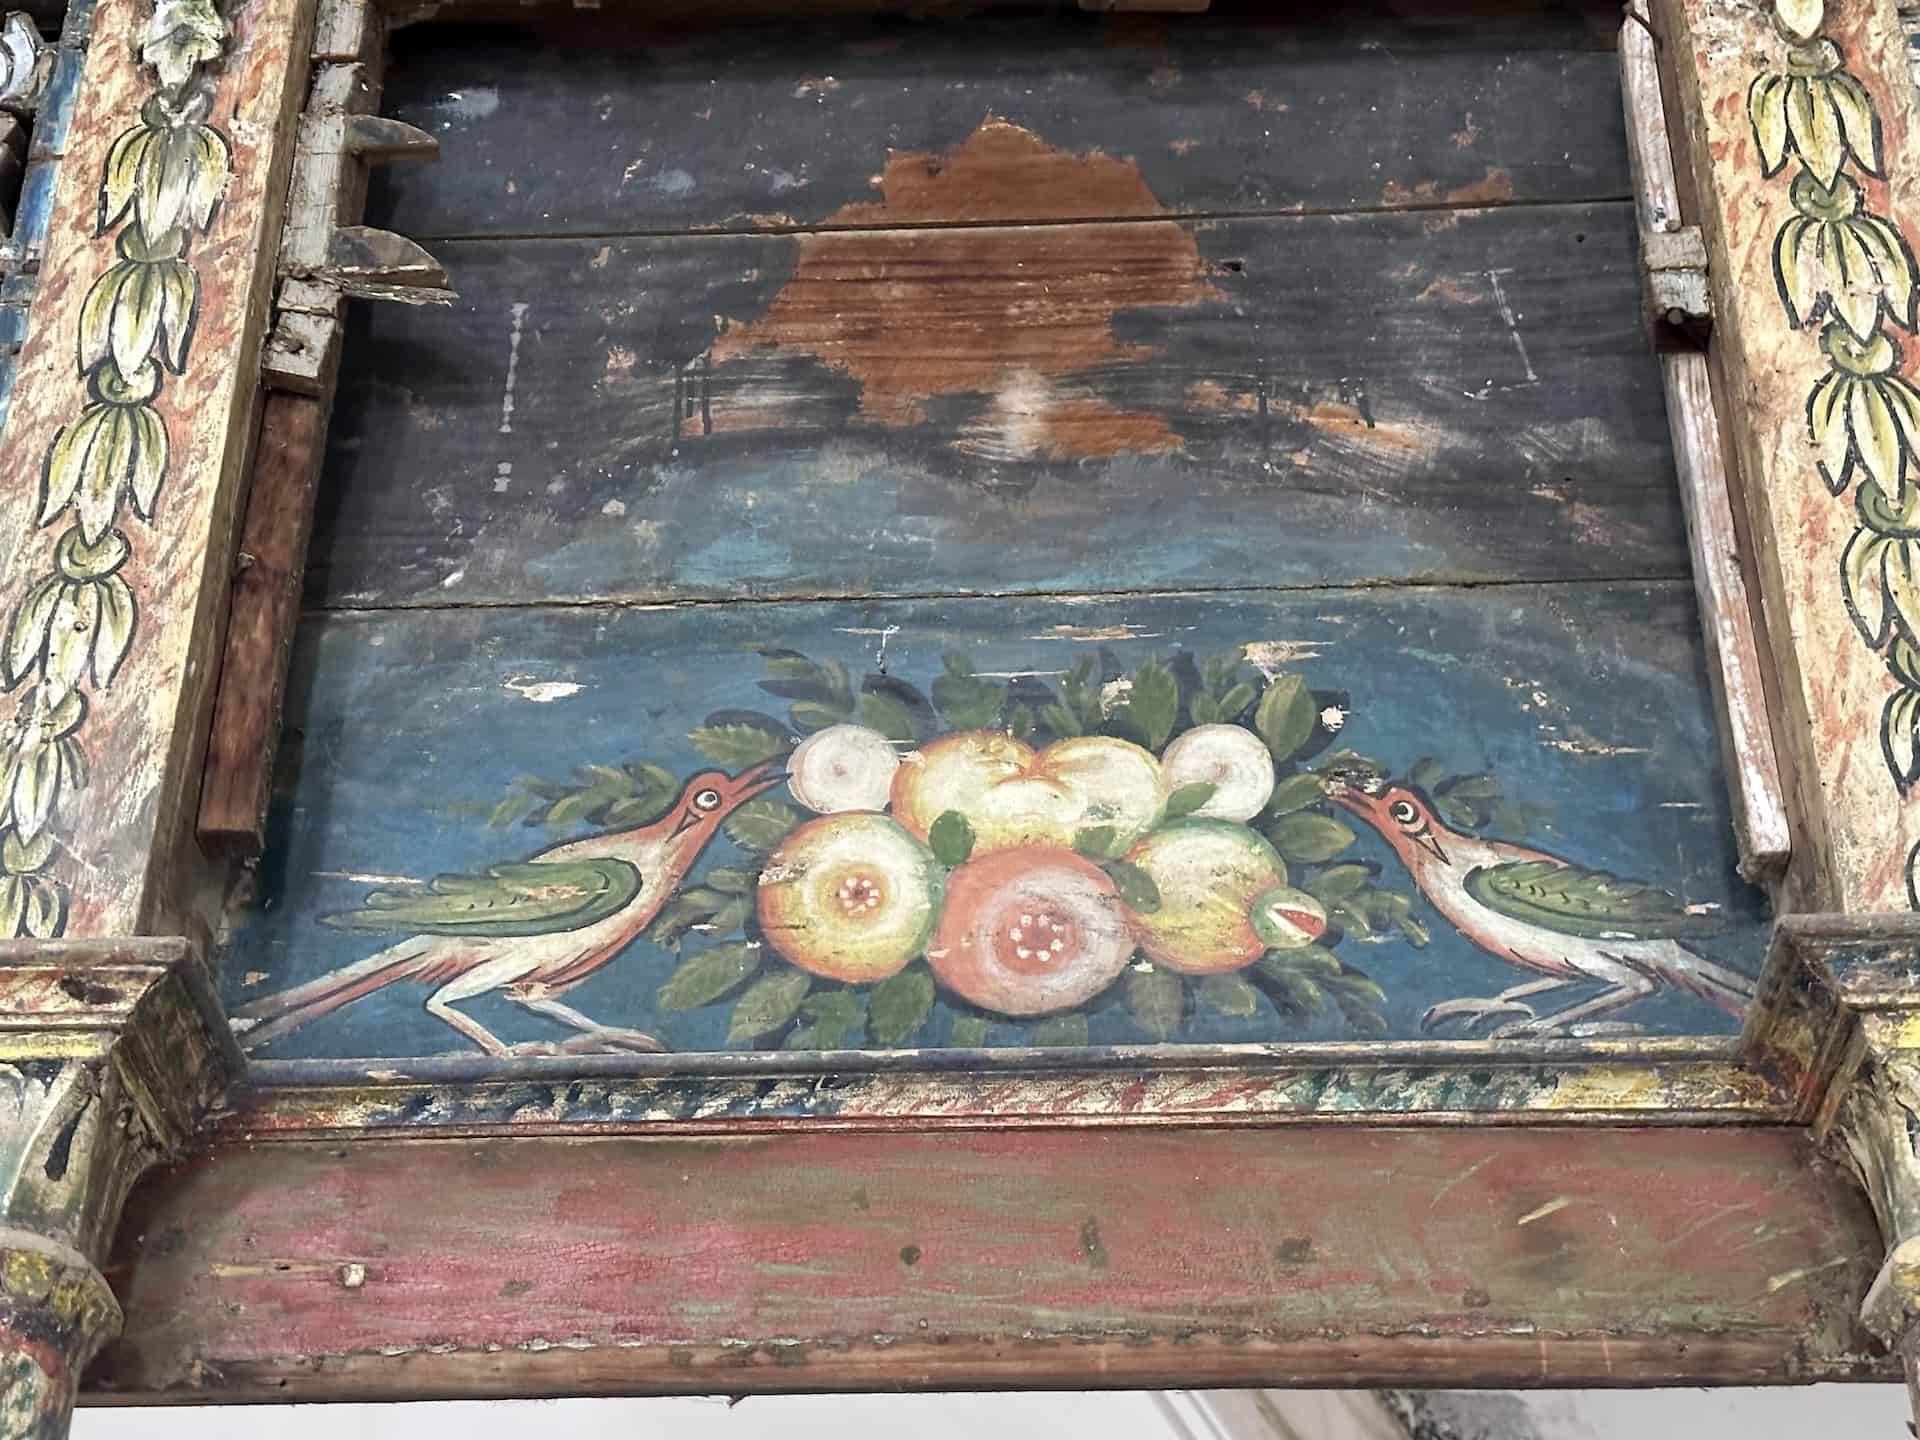 Figures of fruit and birds on the Iconostasis at St. Demetrios Church